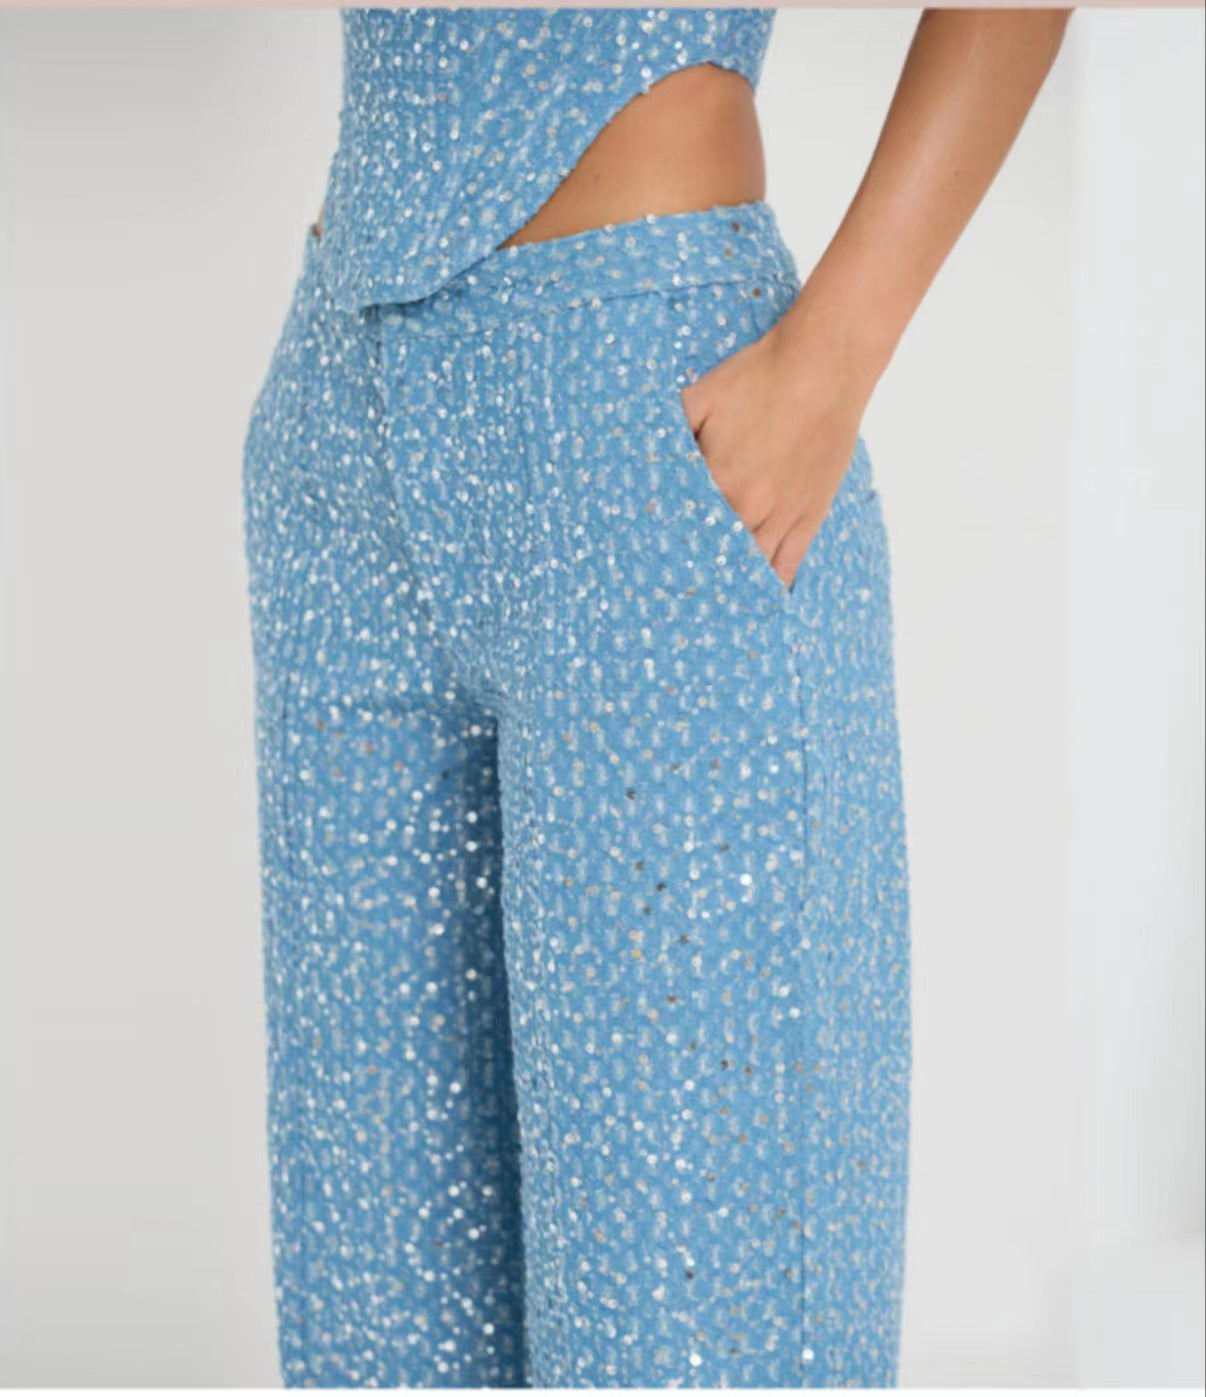 Denim Sequined Tube Top Wide Leg Pants Outfit Set